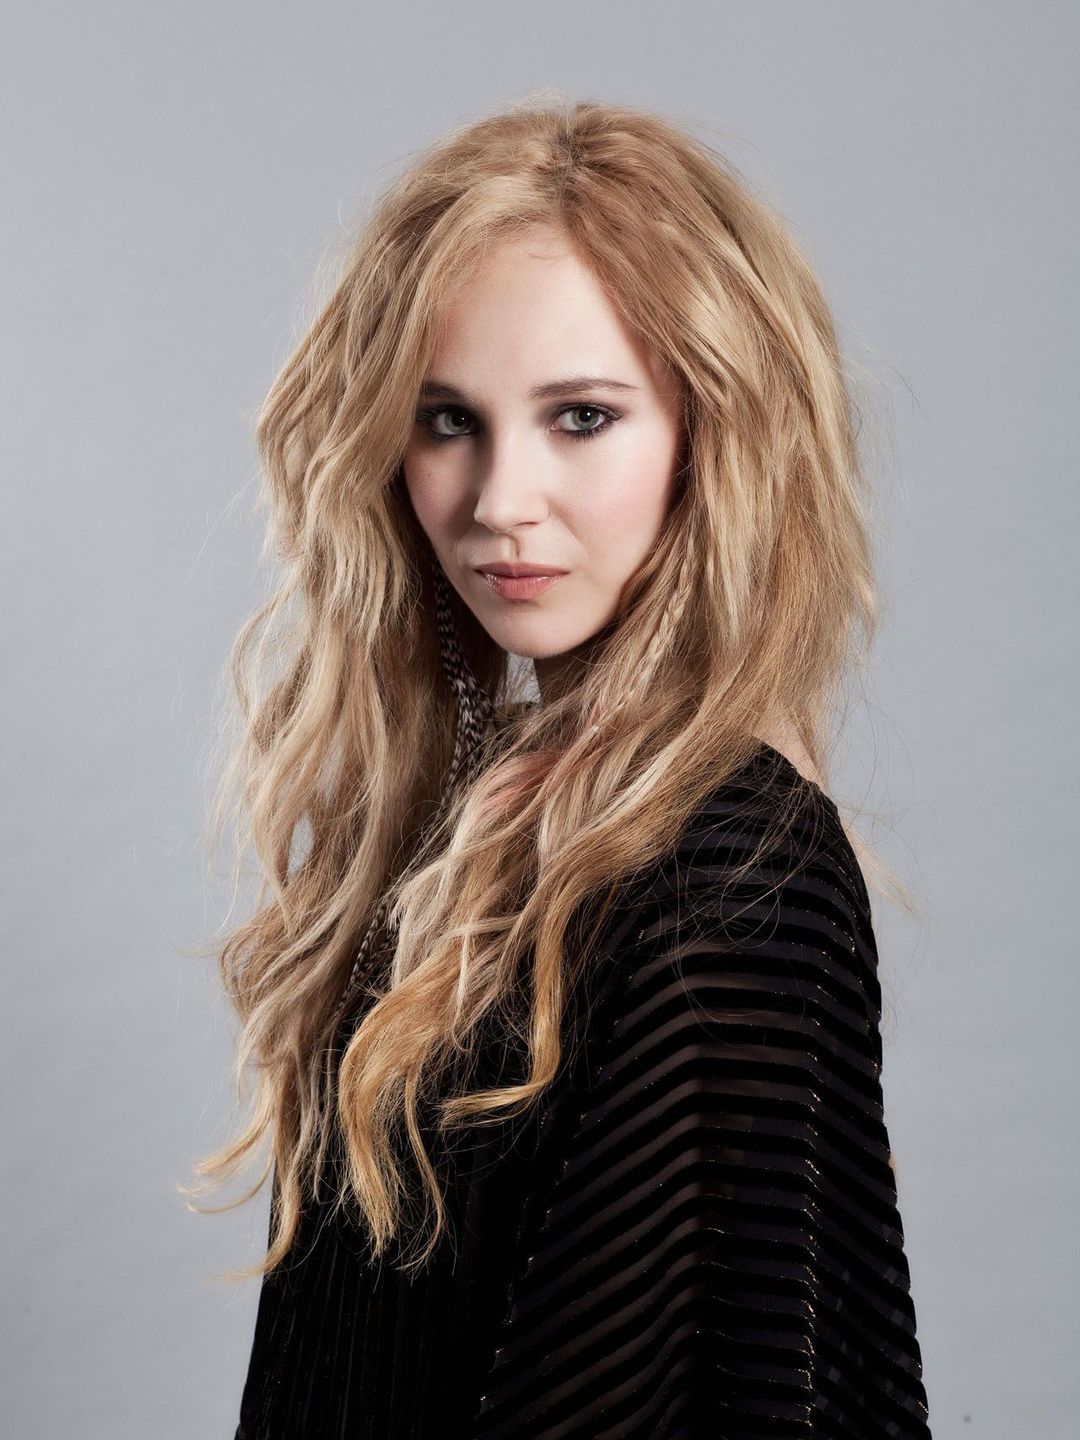 Juno Temple dating history